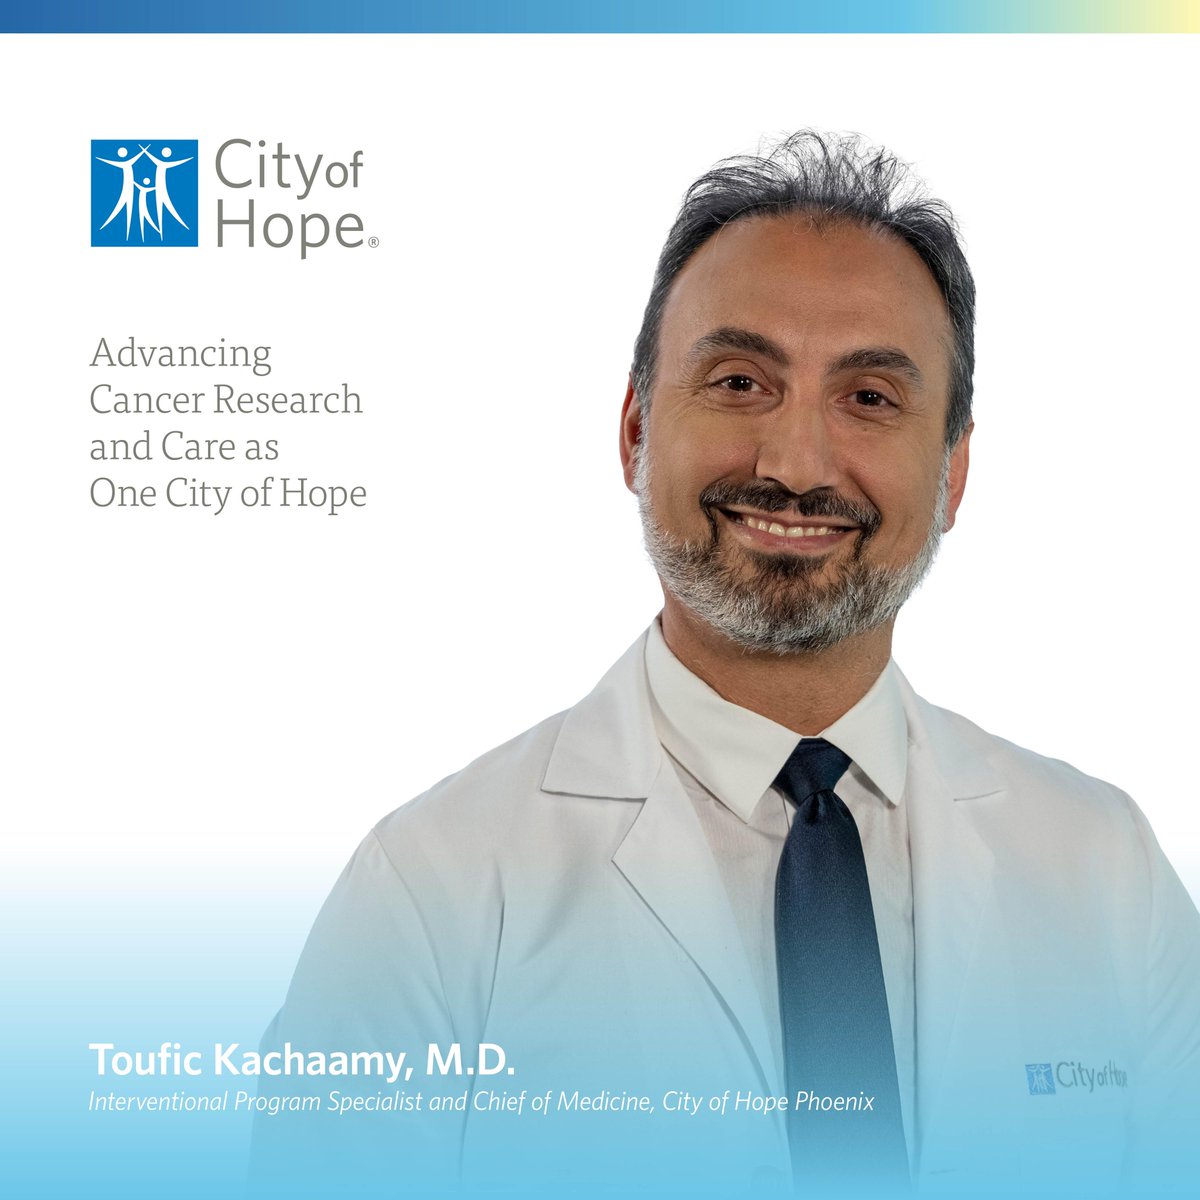 #WeAreCityofHope “‘One City of Hope’ is being able to give hope to more people. By bringing hope, kindness and leading-edge technology, treatments and interventions to more people—that elevates the care everywhere.” –Toufic Kachaamy, M.D., City of Hope Phoenix